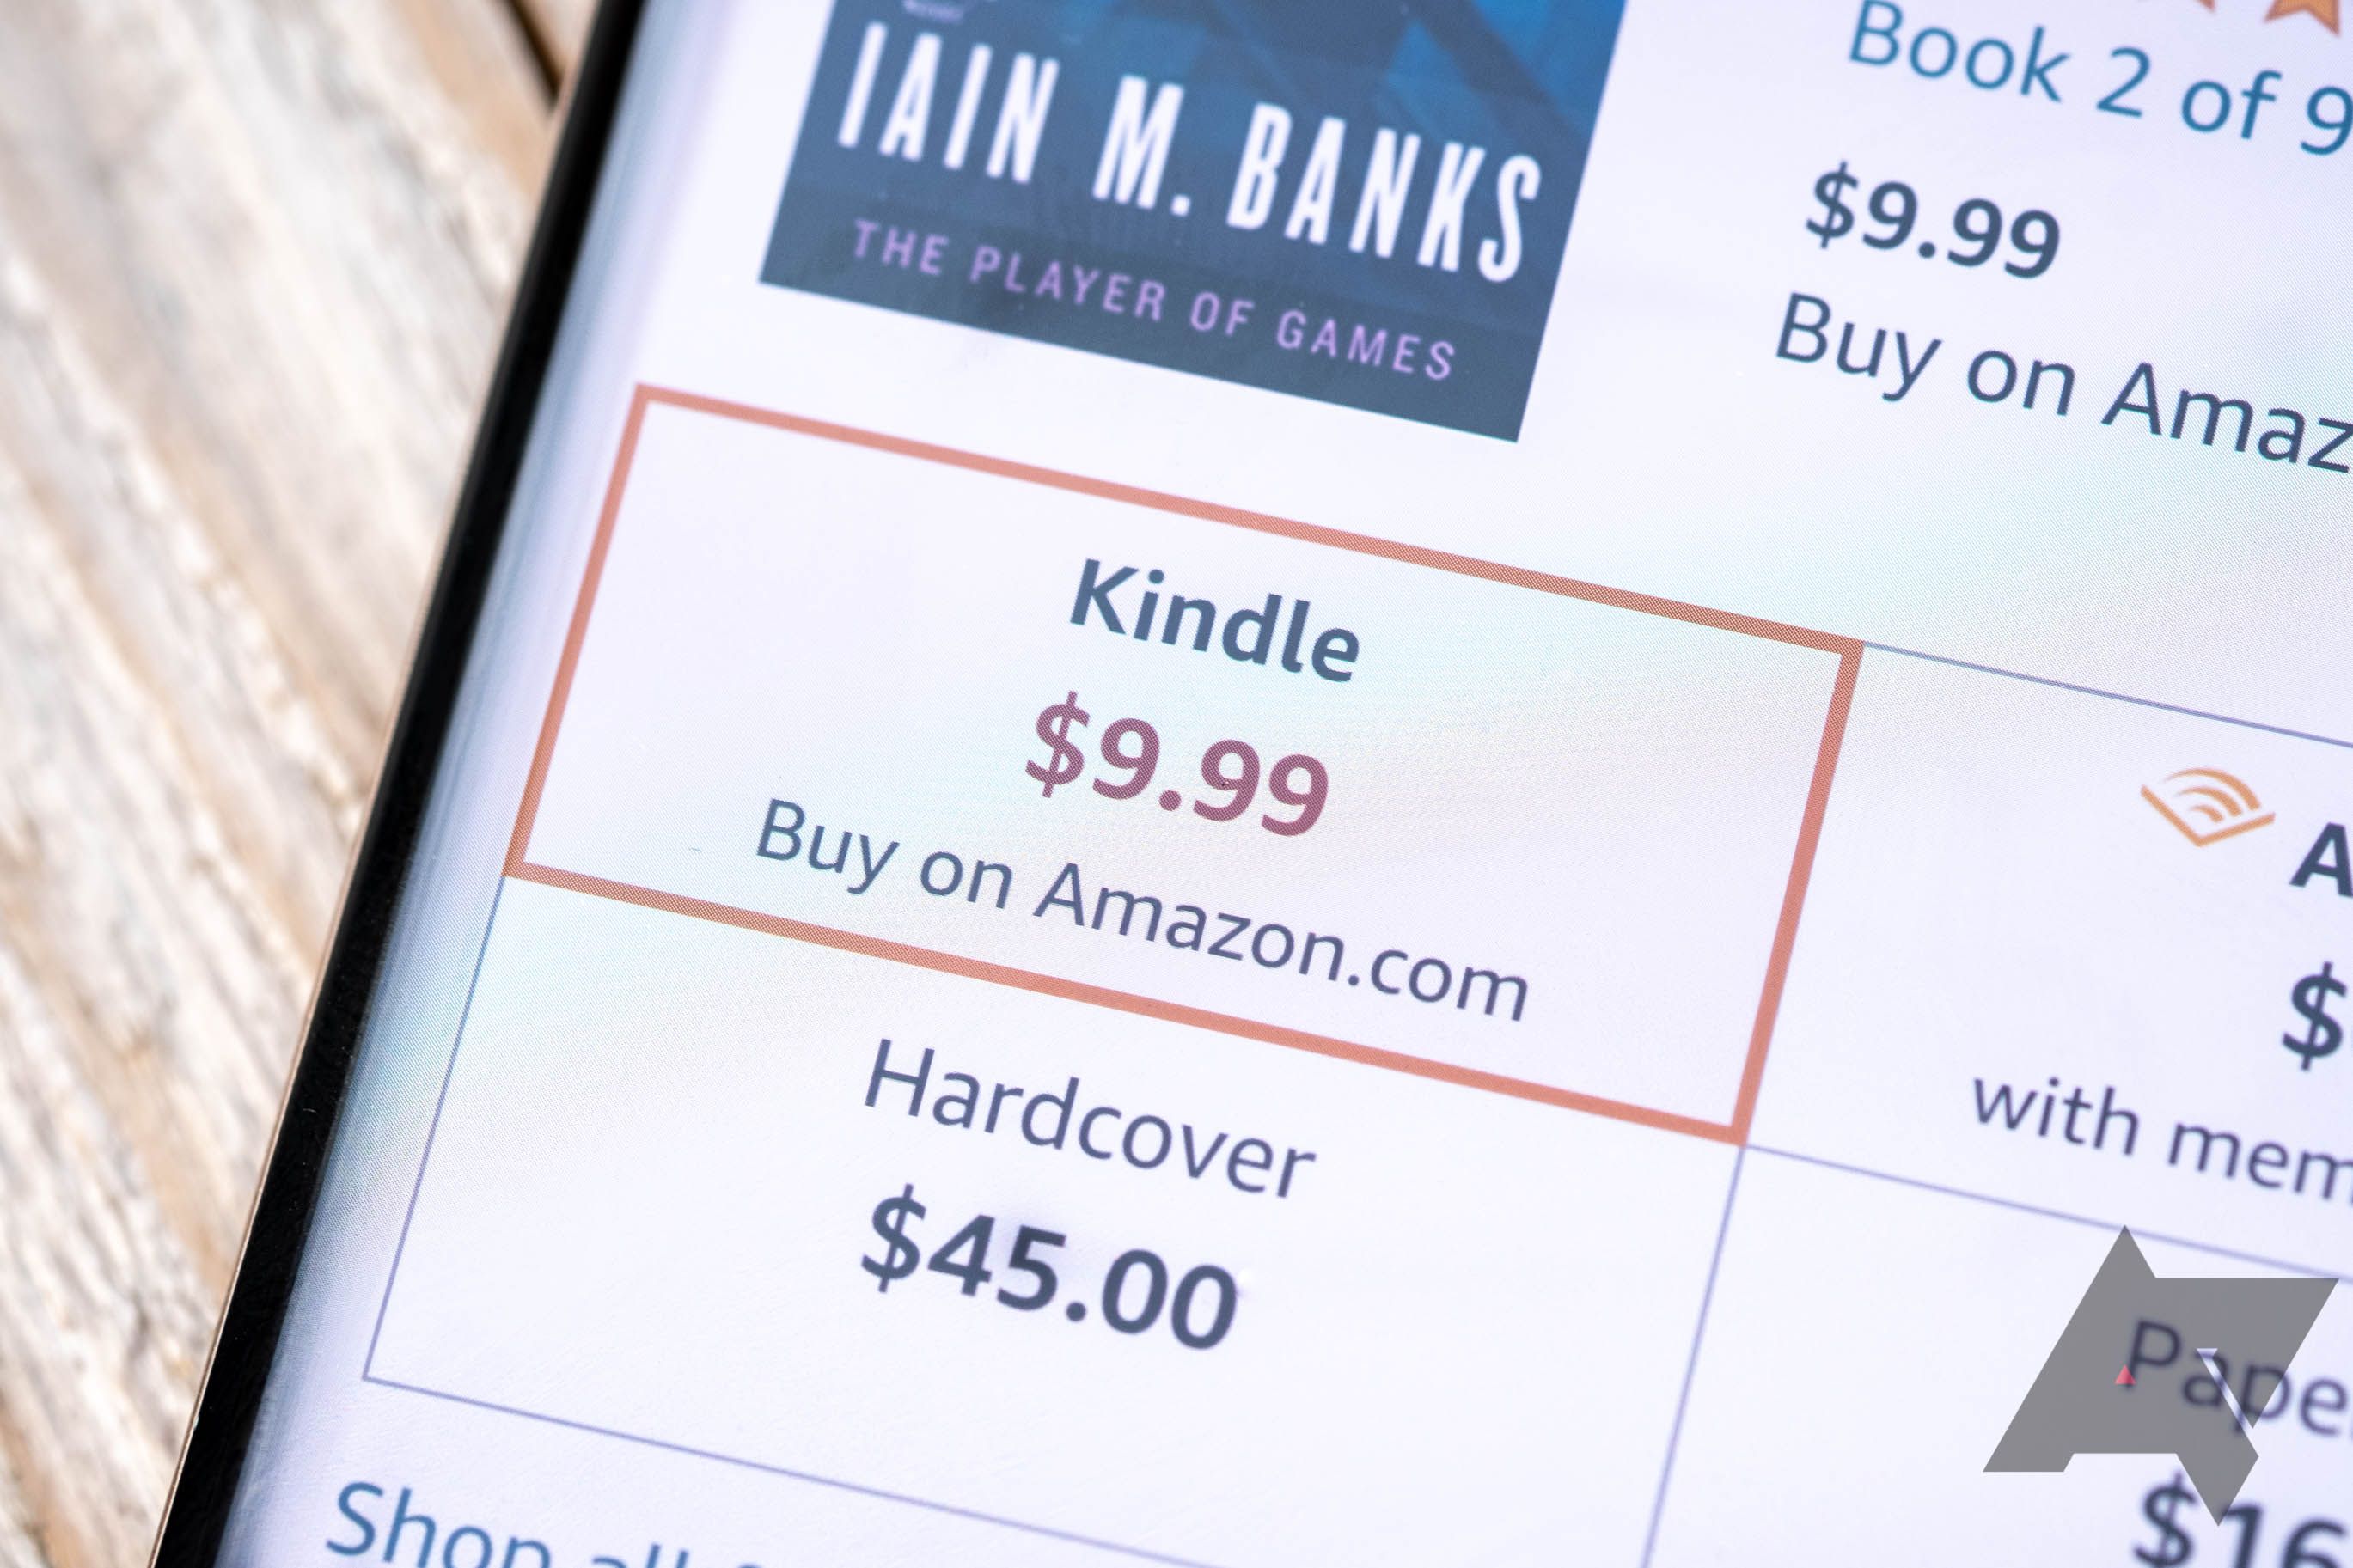 Amazon Shopping in app ebook purchase